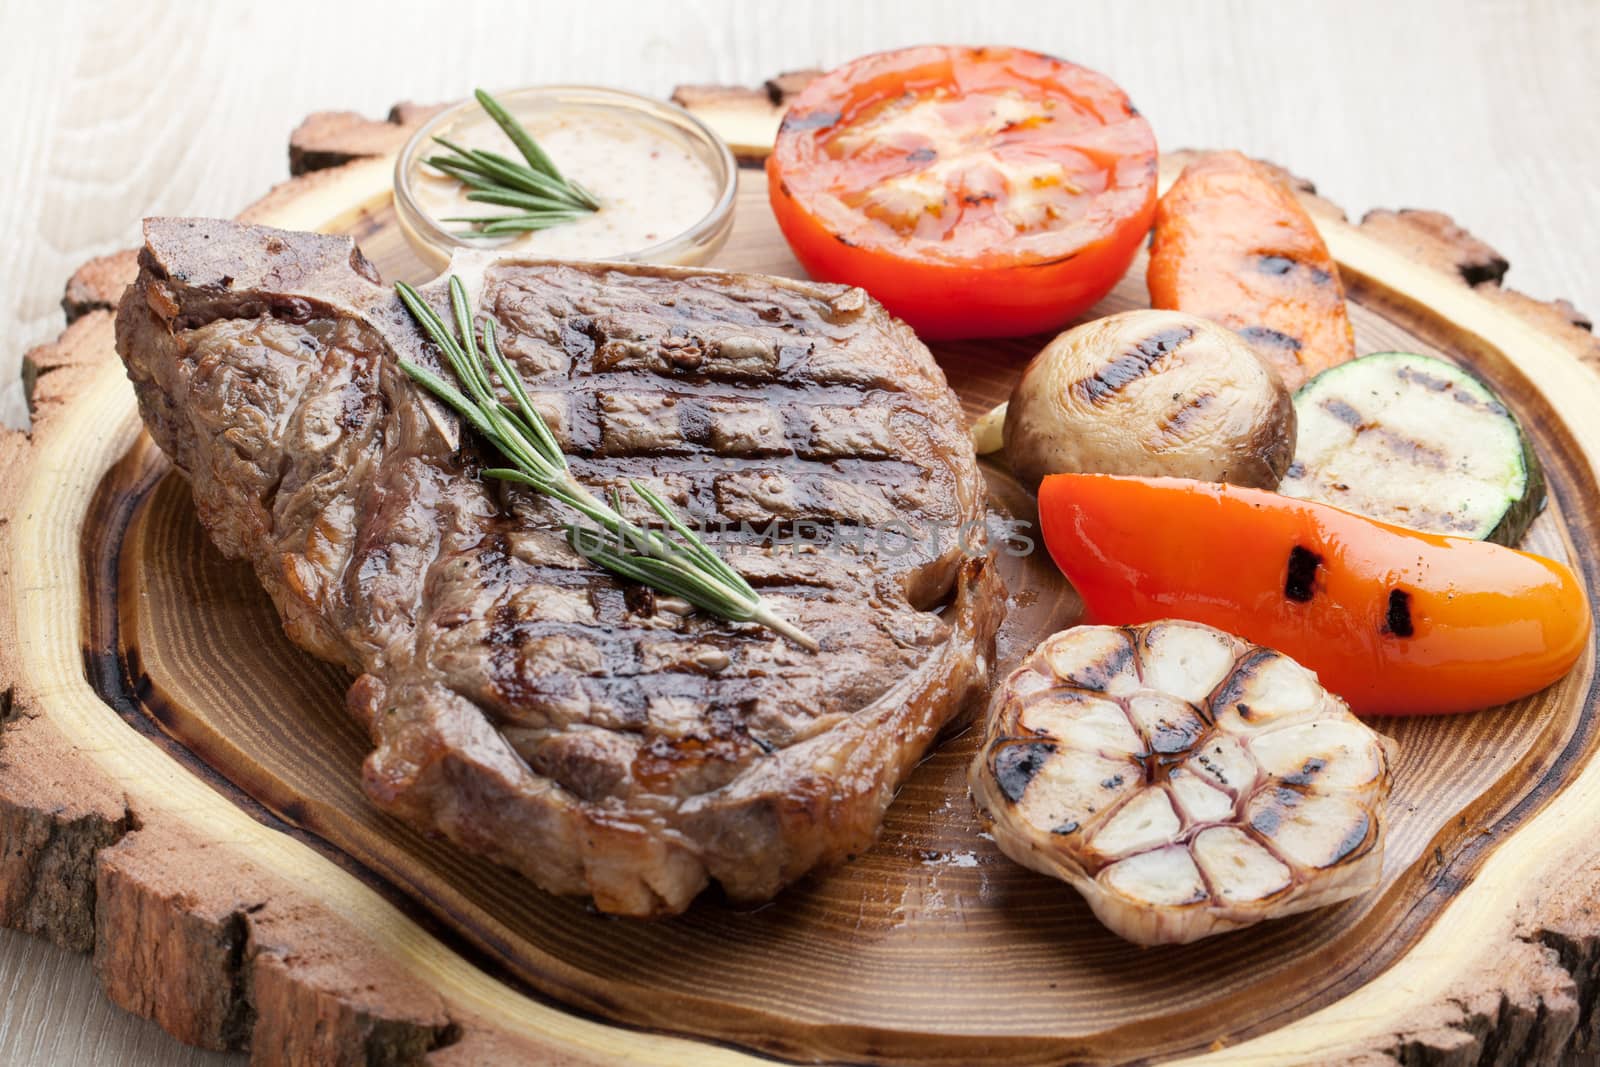 Portion of BBQ t-bone steak  served  on wooden board with  rosemary, mustard sauce  and grilled vegetables : tomato, carrot, paprika, garlic,  champignon,  zucchini